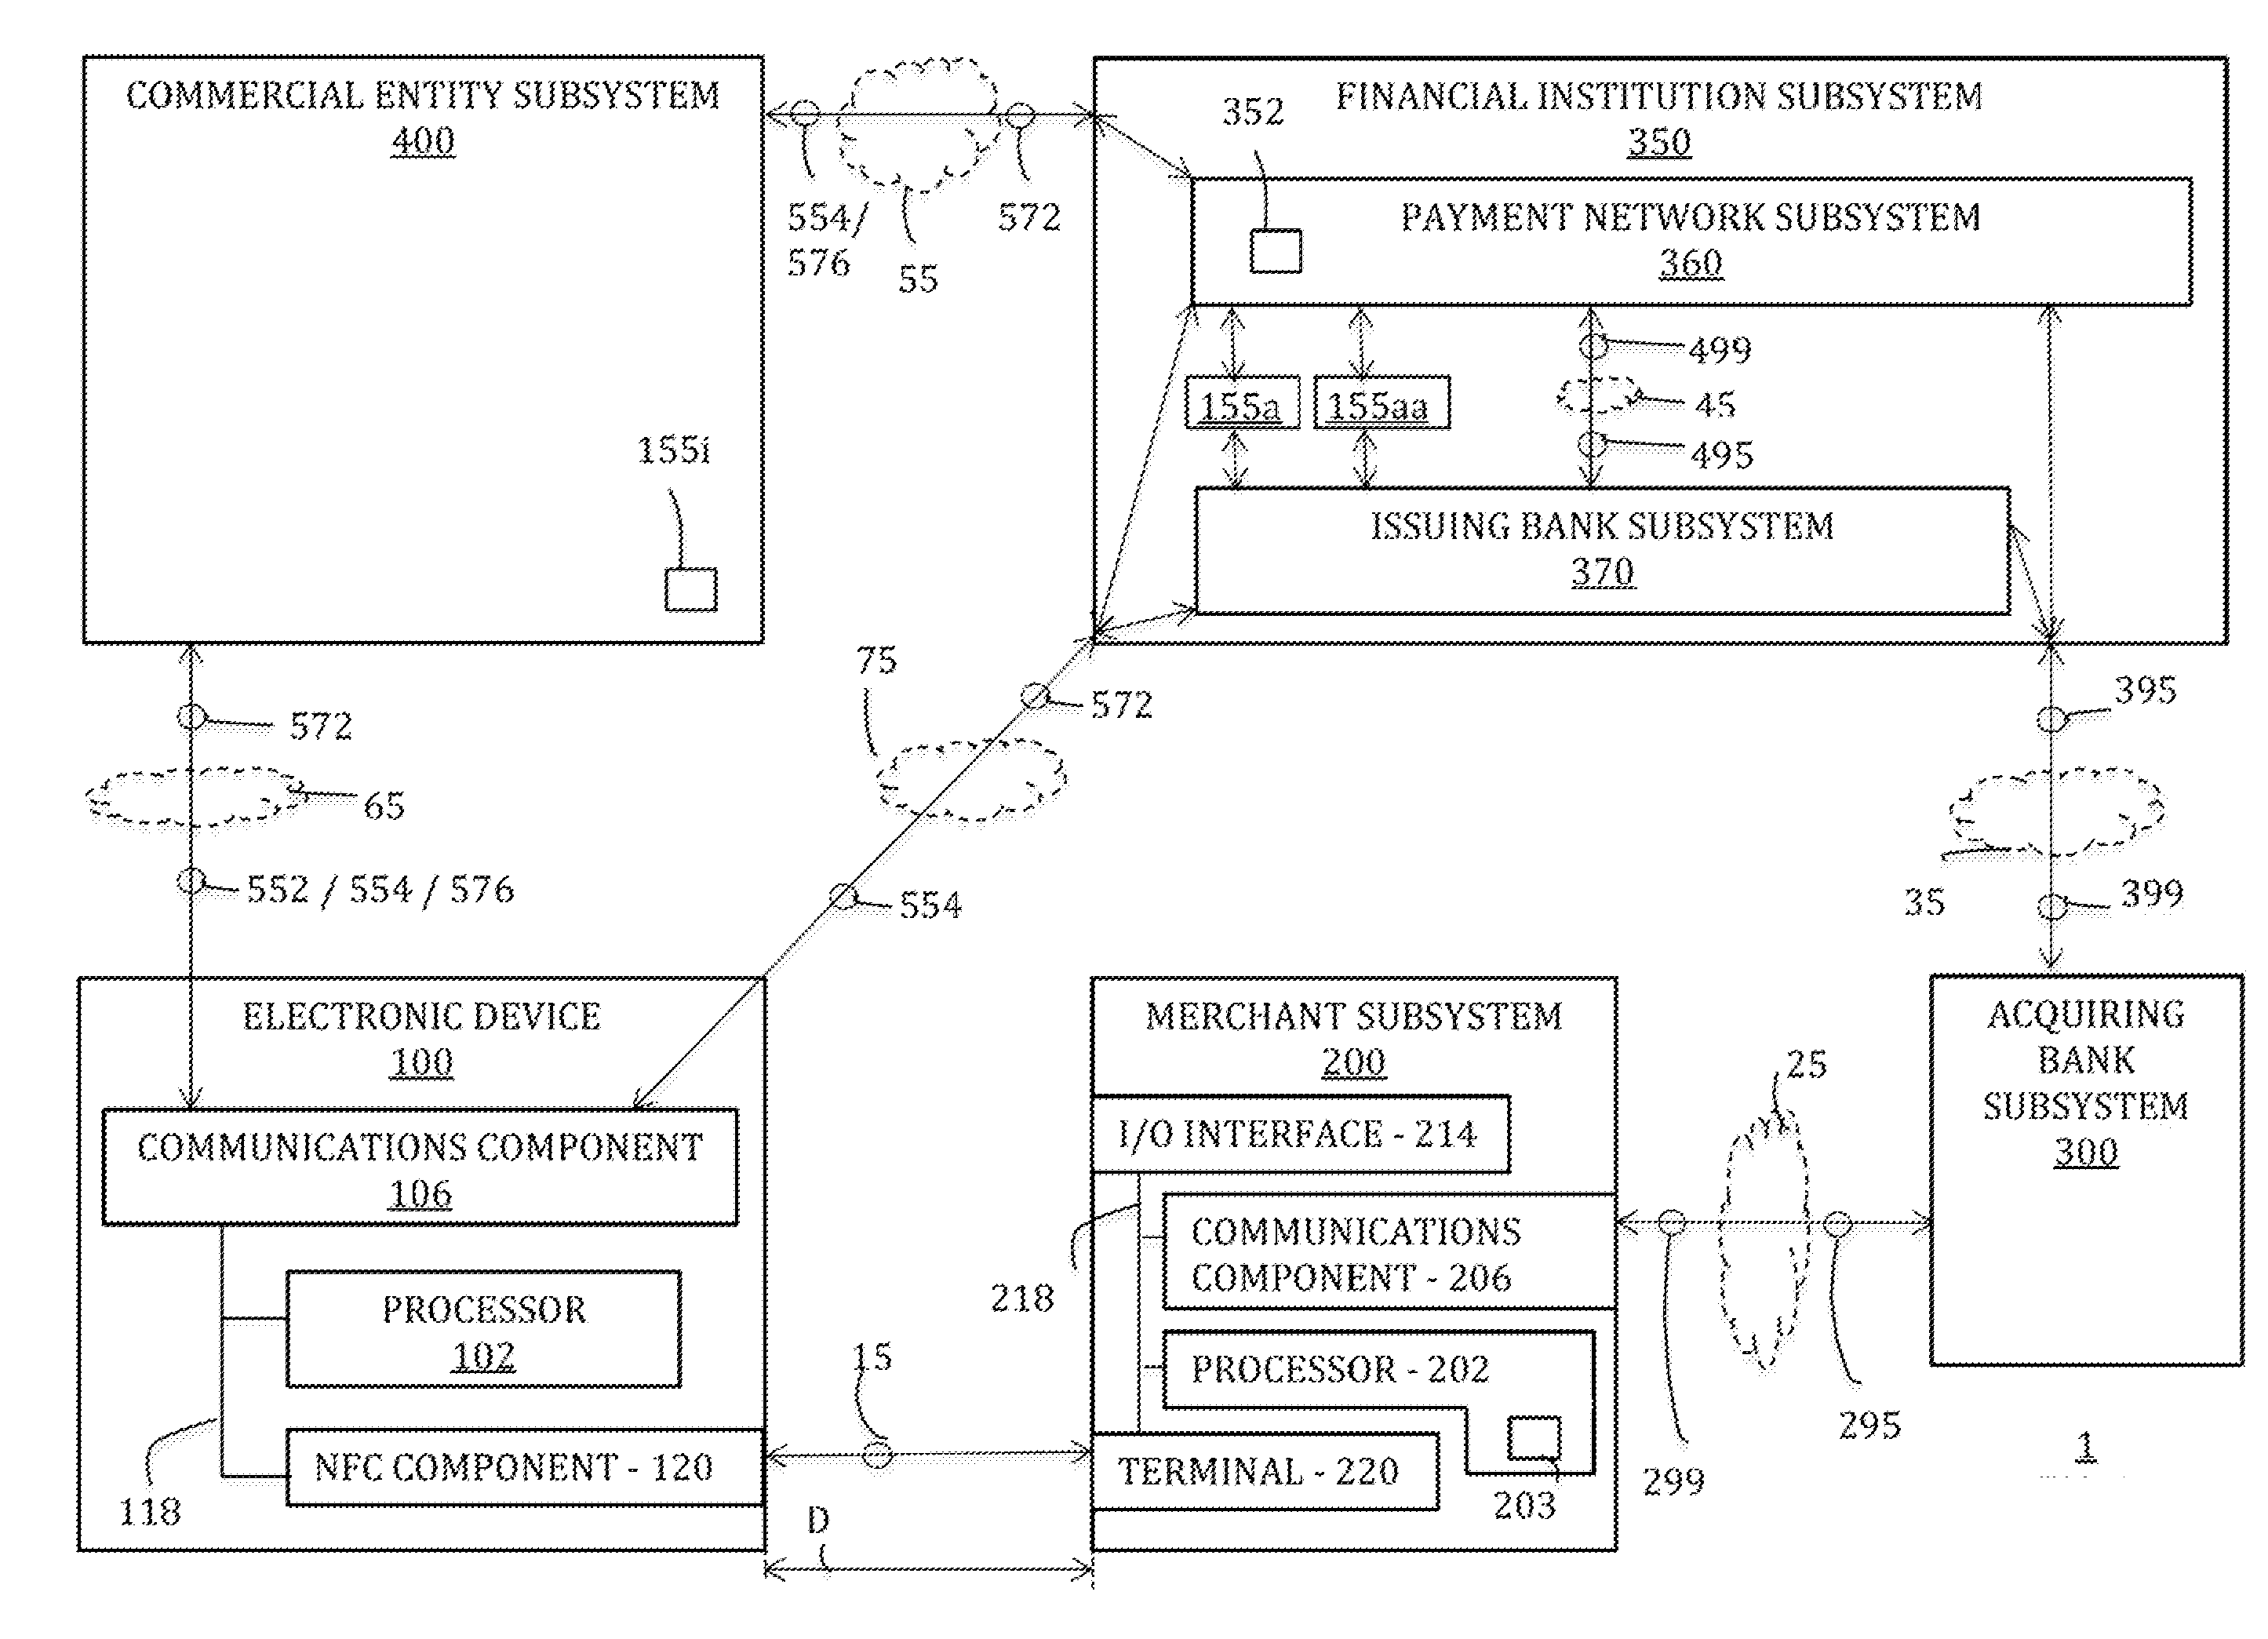 Deletion of credentials from an electronic device